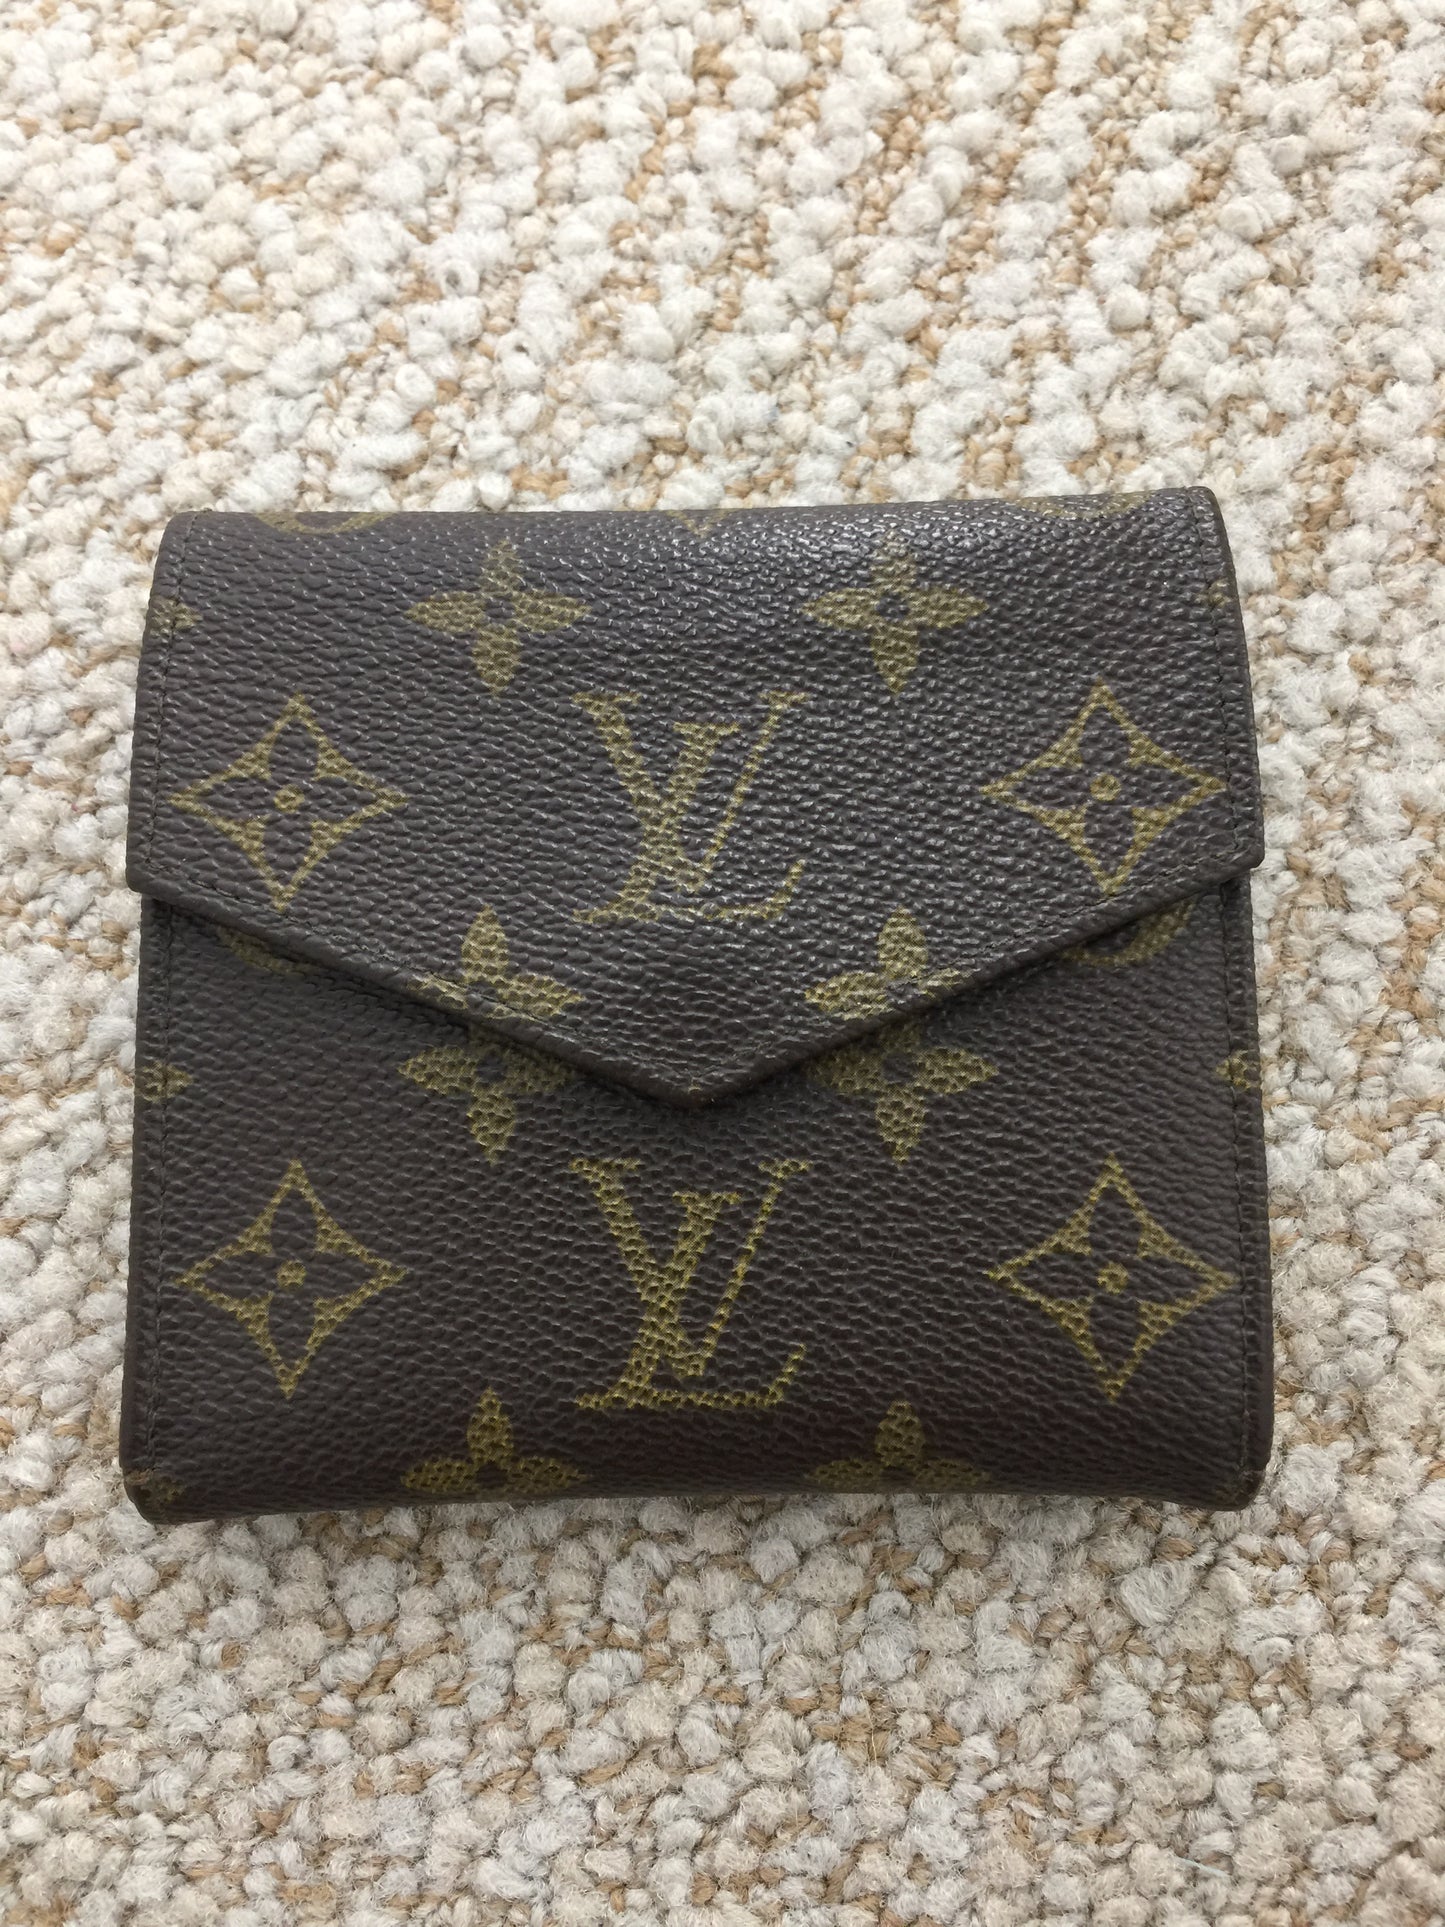 LS Upcycled LV Ellie Wallet with crossbody strap and bag charm